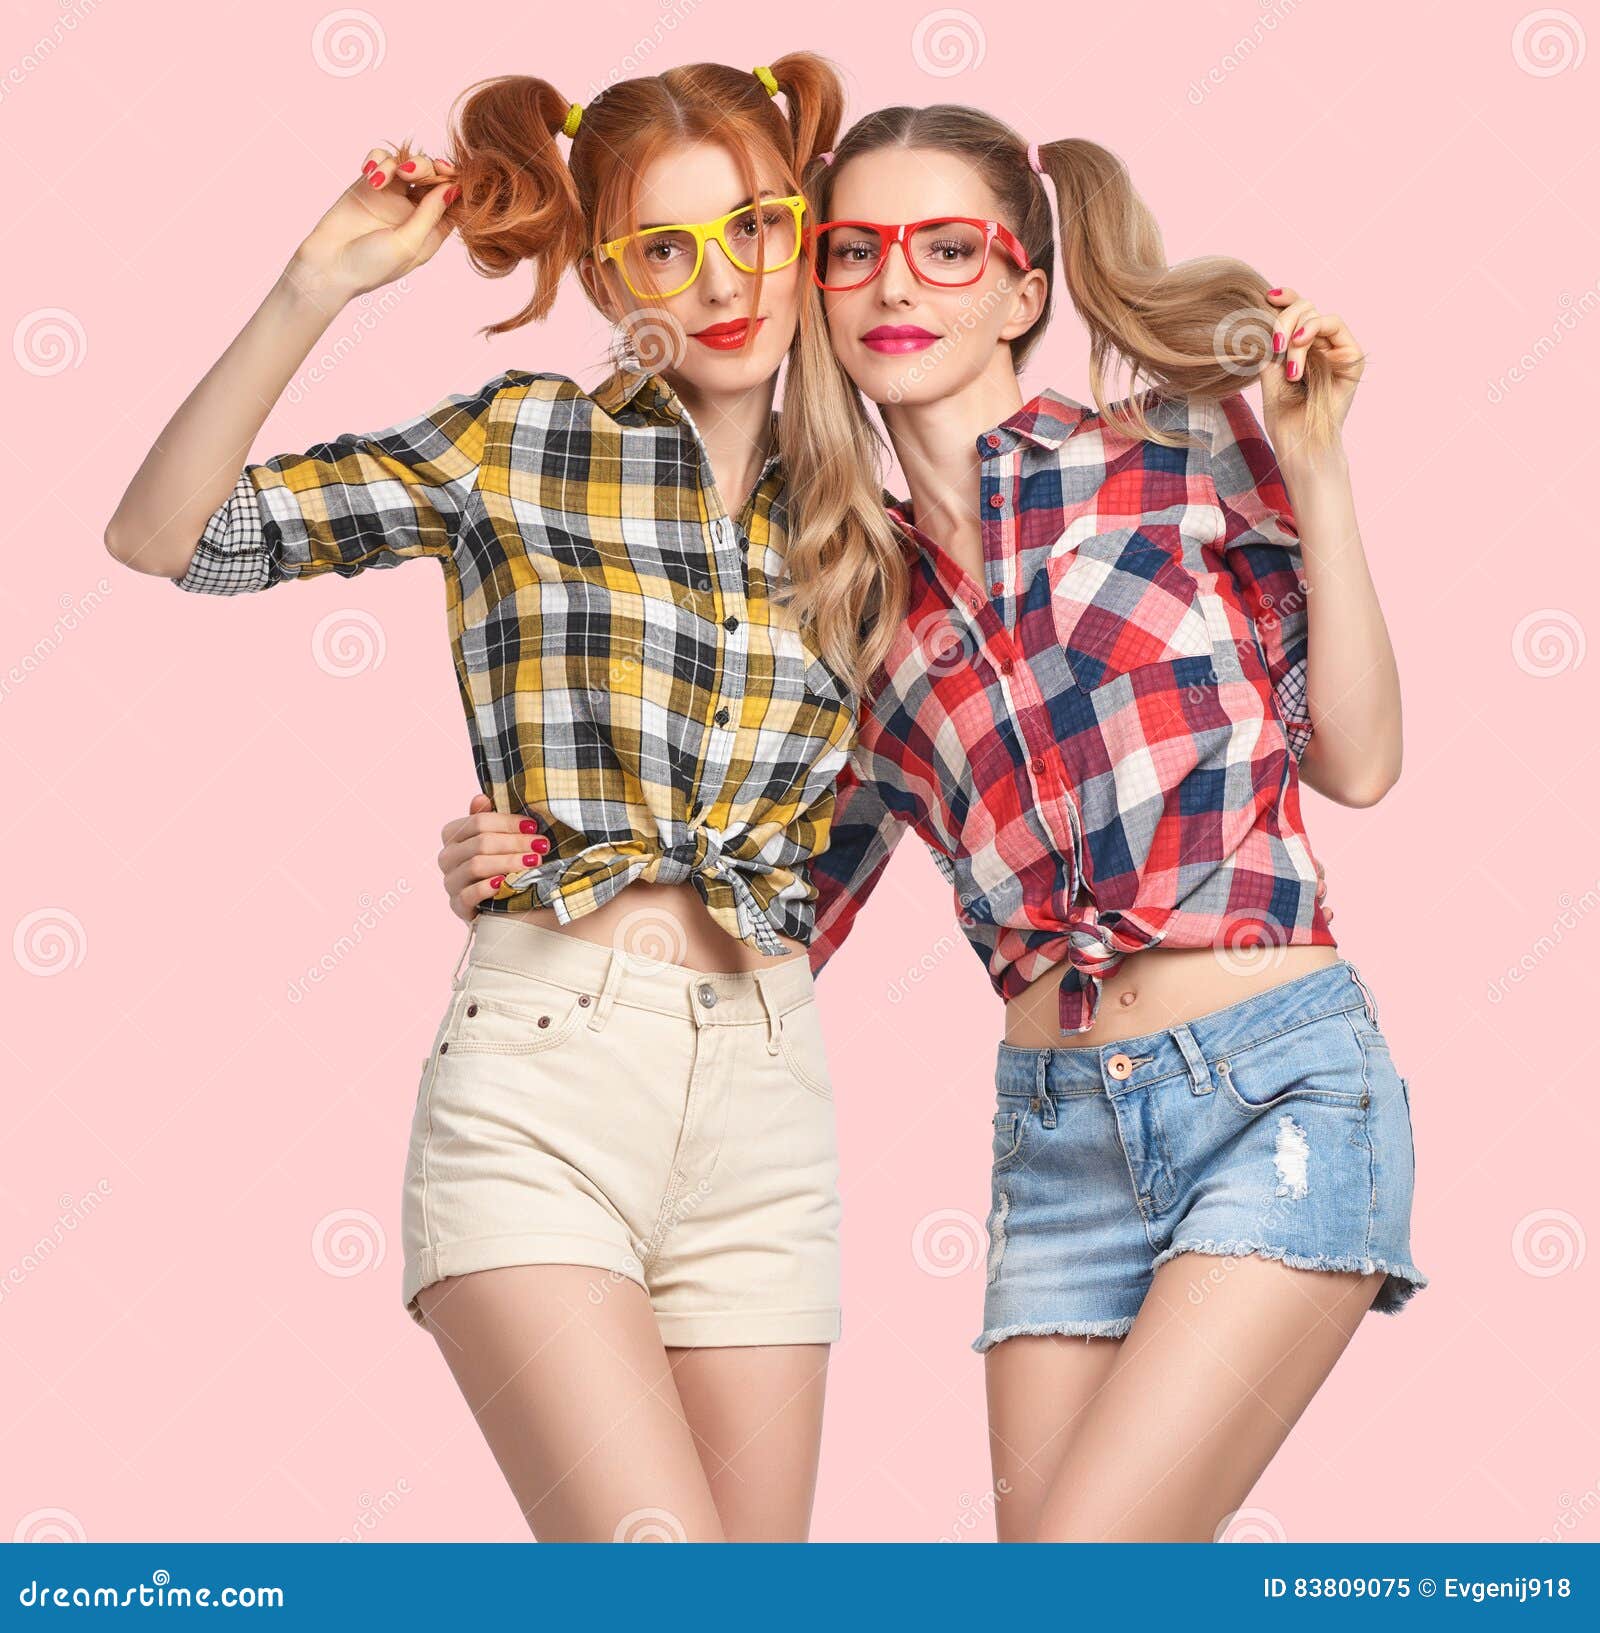 Fashion Funny Girl Crazy Having Fun. Smiling Nerd Stock Image - Image of  creative, hairstyle: 83809075